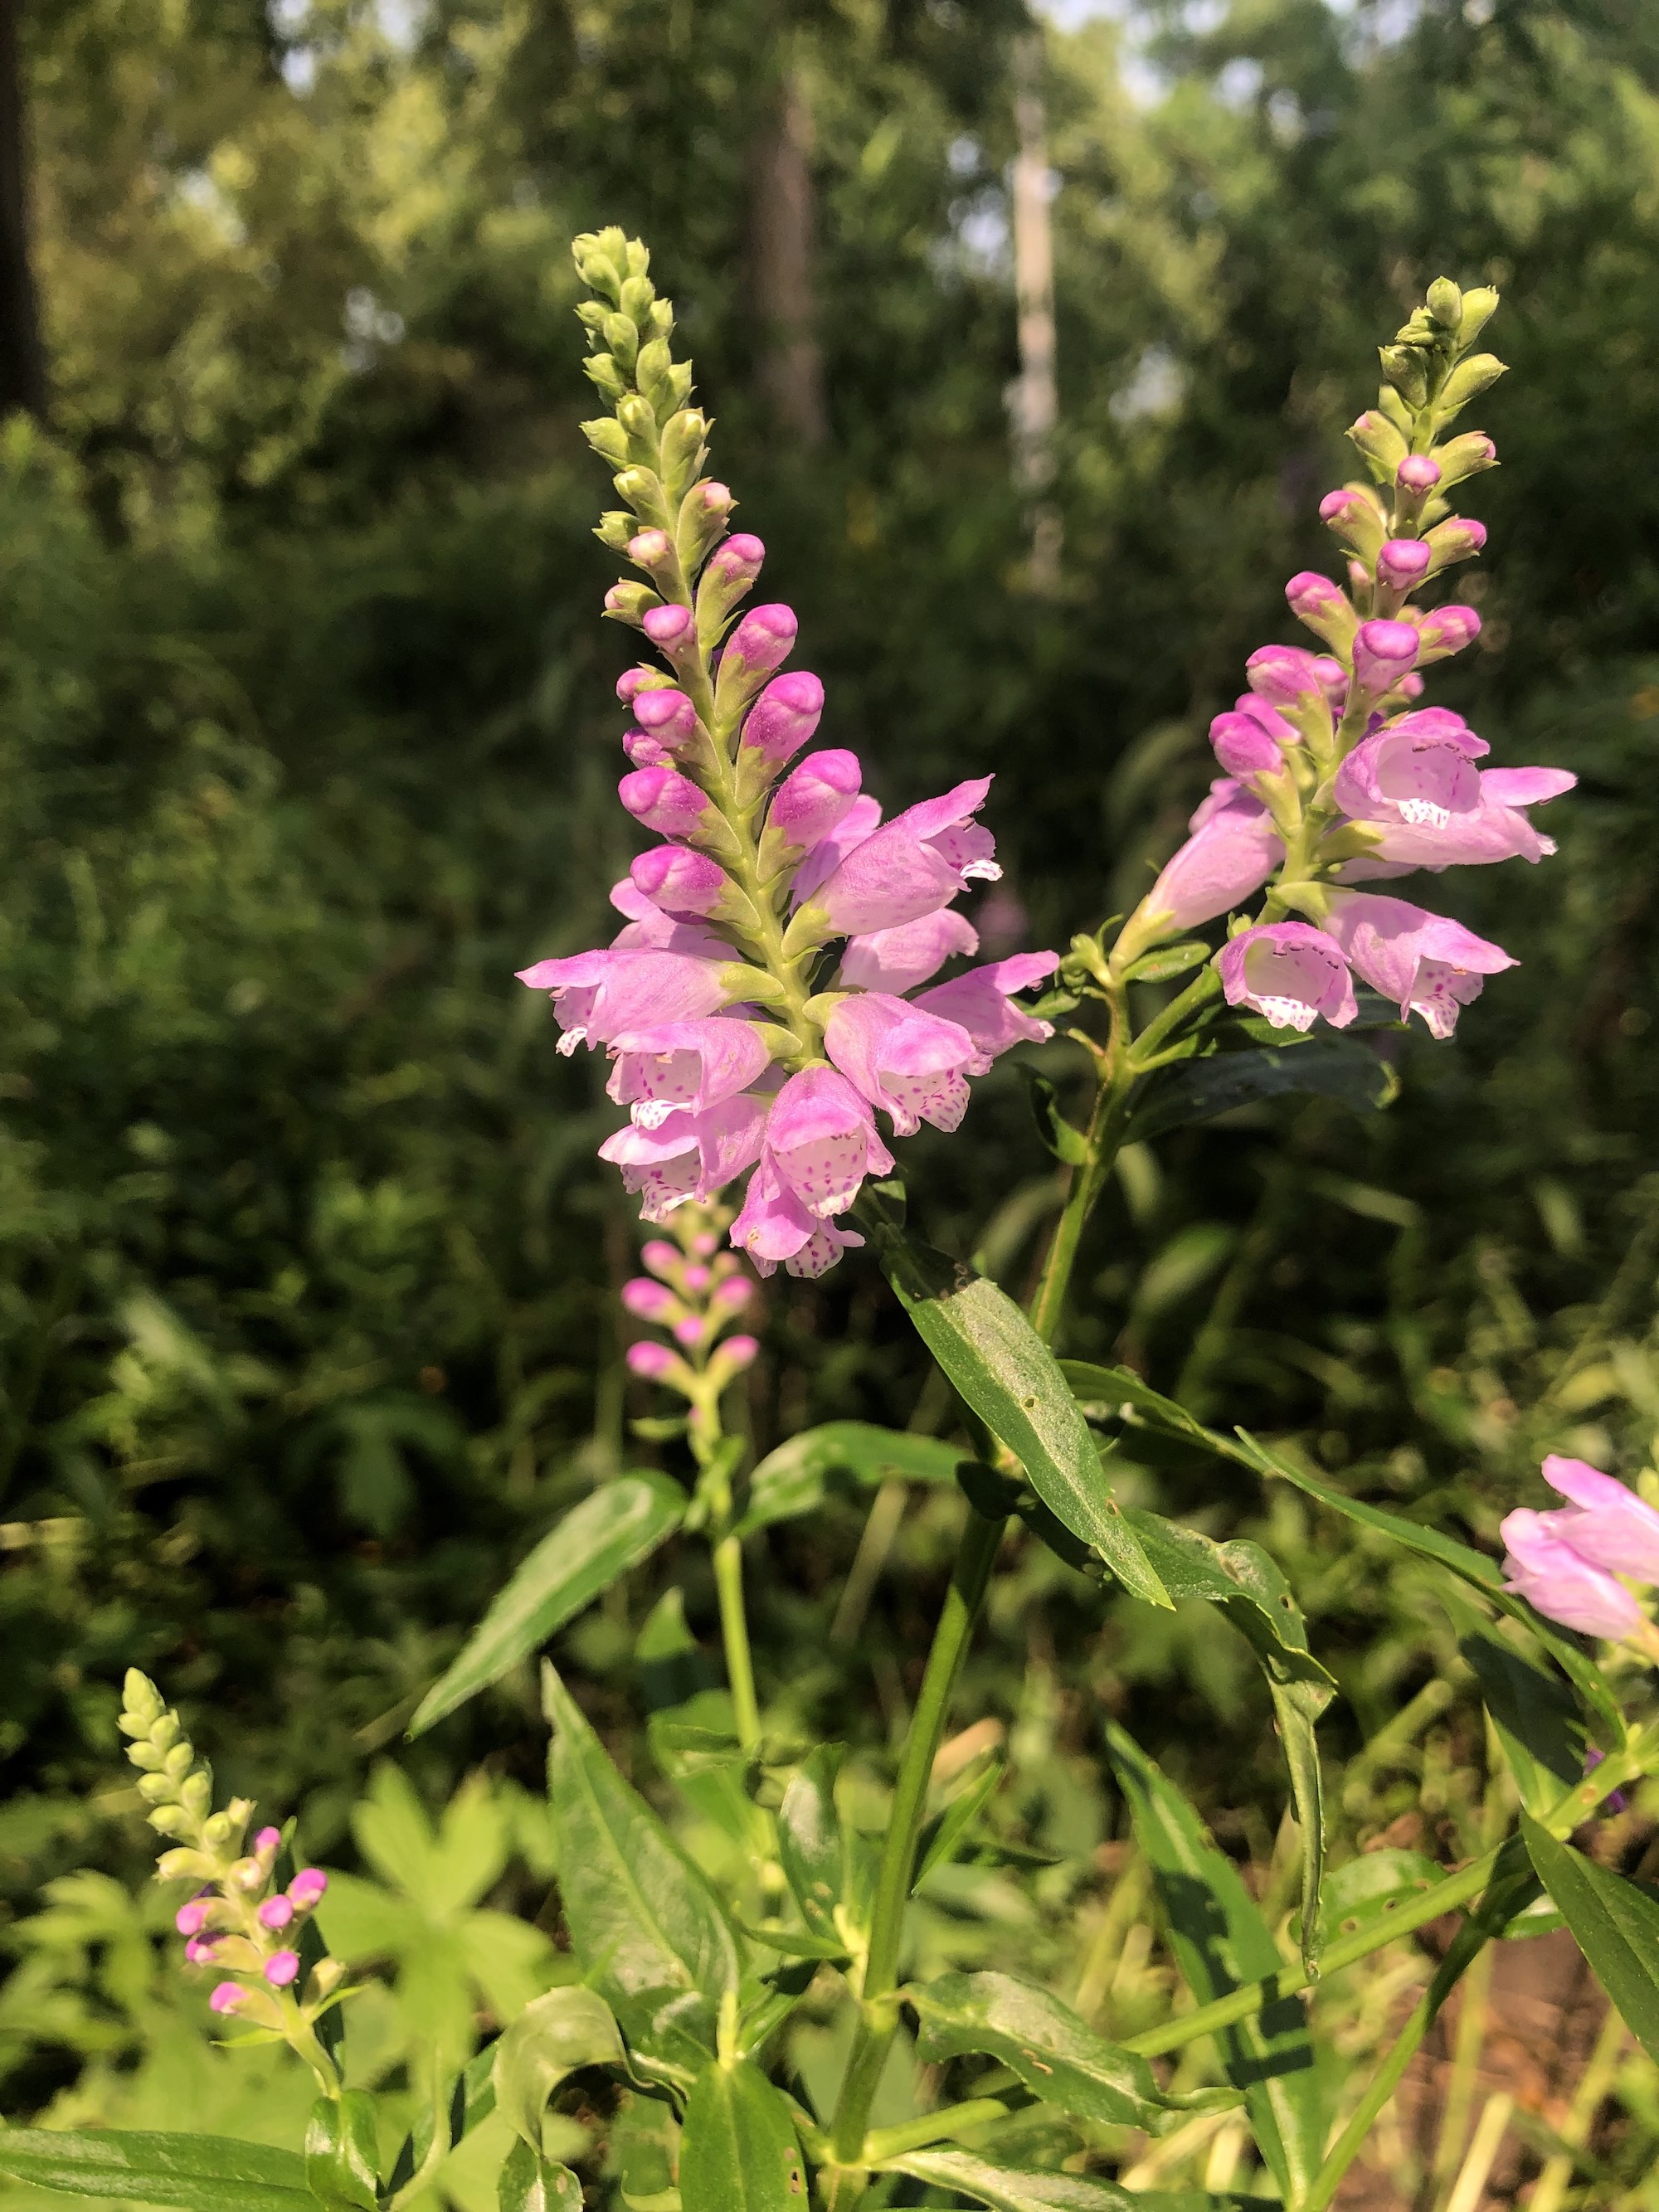 Obedient Plant in Thoreau Rain Garden in Madison, Wisconsin on July 31, 2021.